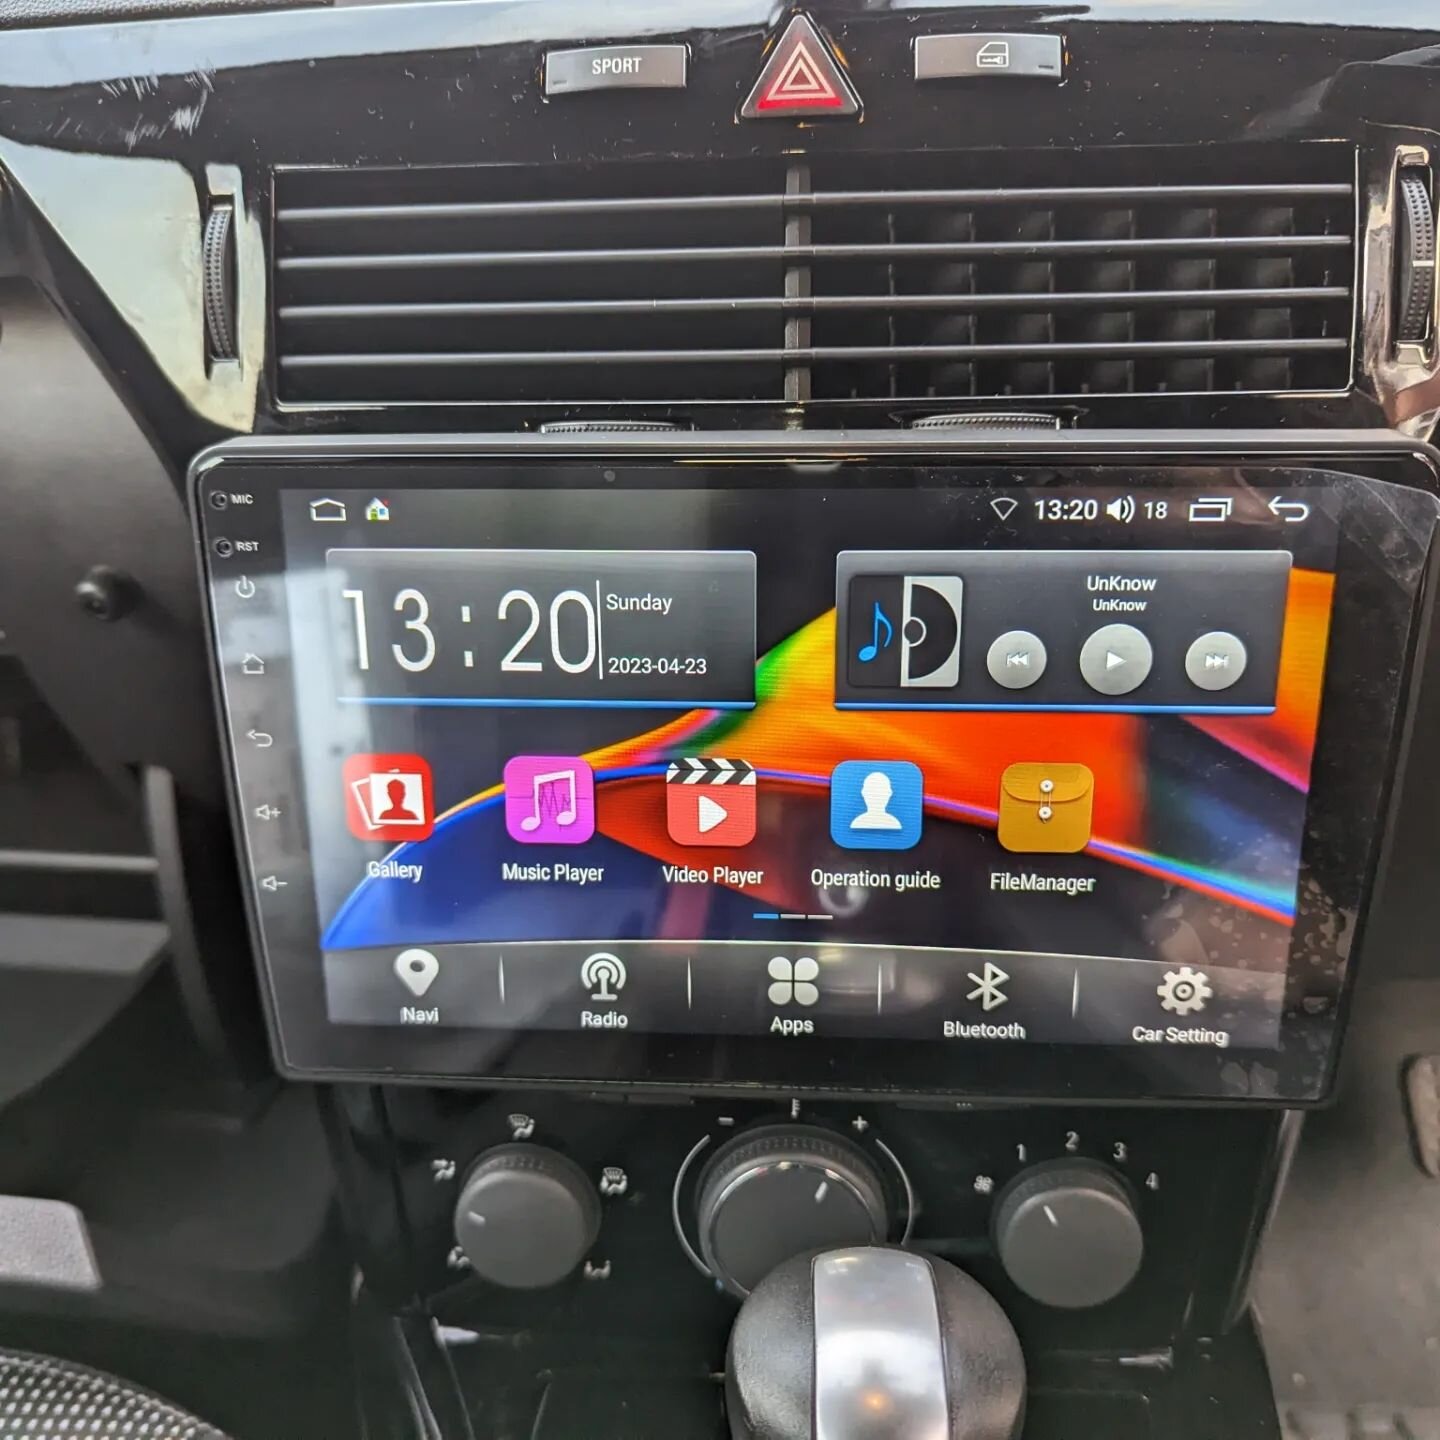 Astra H 2008 One of our regular Andriod screens with Built in Carplay and Android Auto fitted to this car along with an 1080P reverse camera

#vauxhall #vauxhallastra #vauxhallcarplay #astracarplay 
#vauxhallupgrades #applecarplay #androidauto #carpl